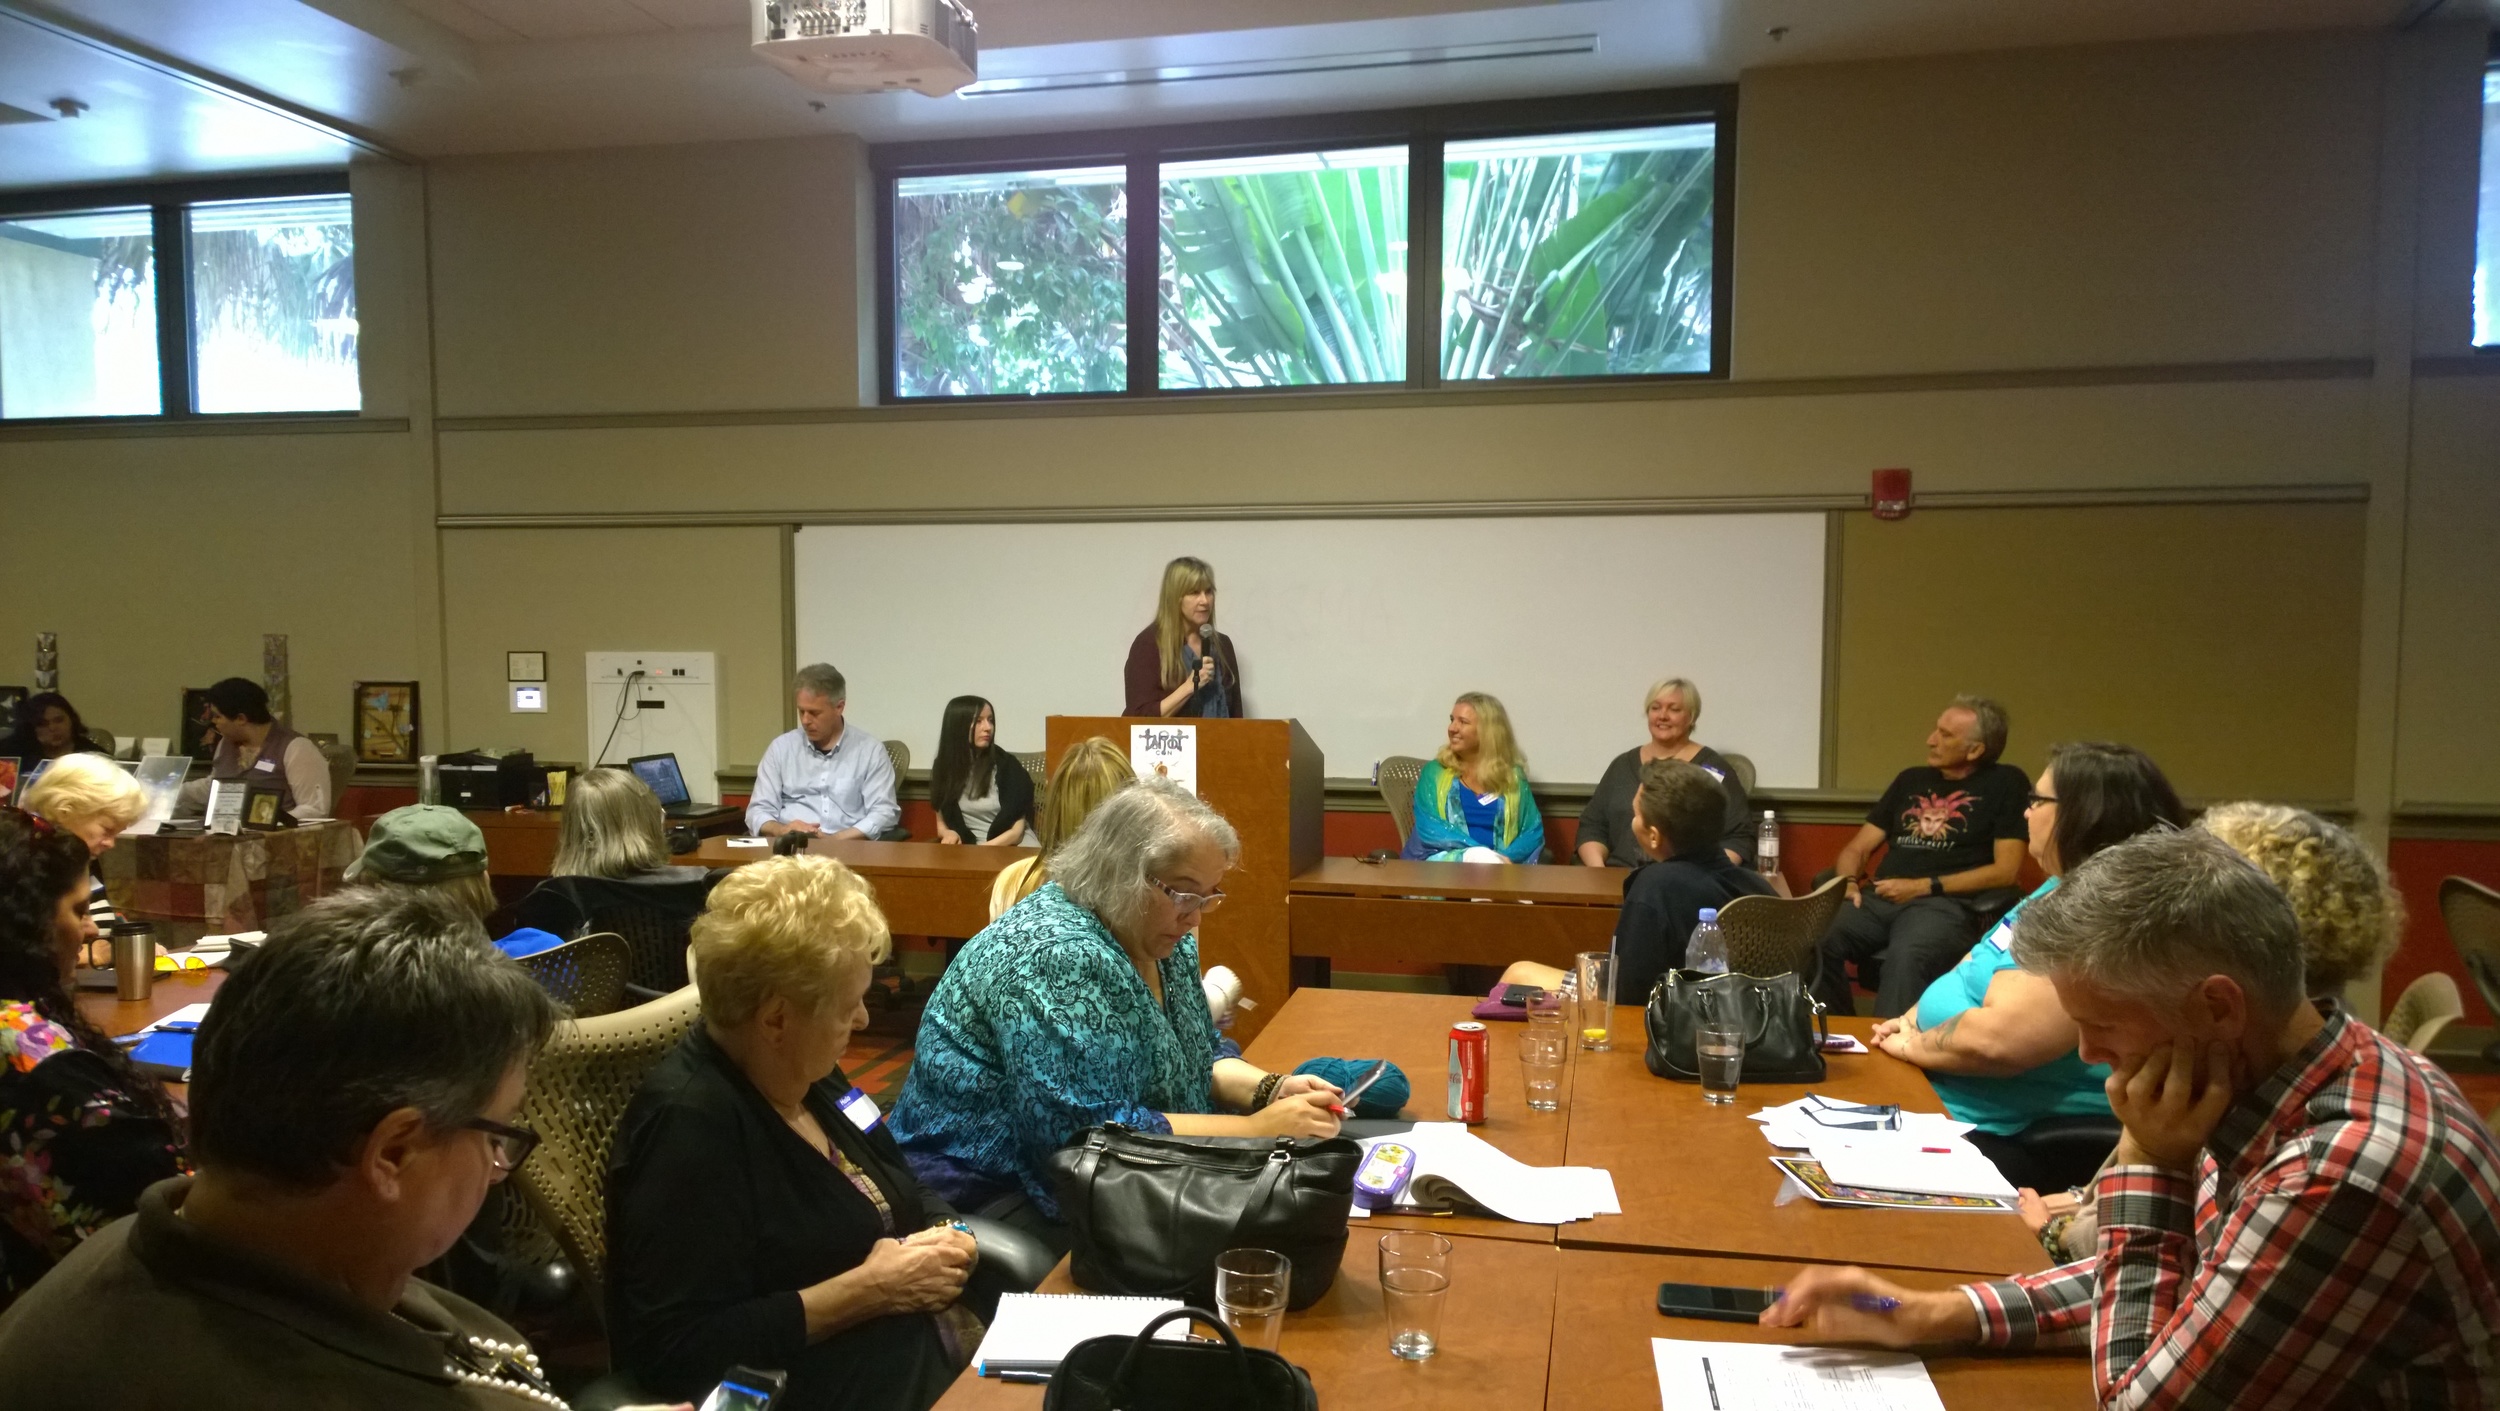  The Tarot Artists and Authors panel, moderated by Mary Ellen Collins. 